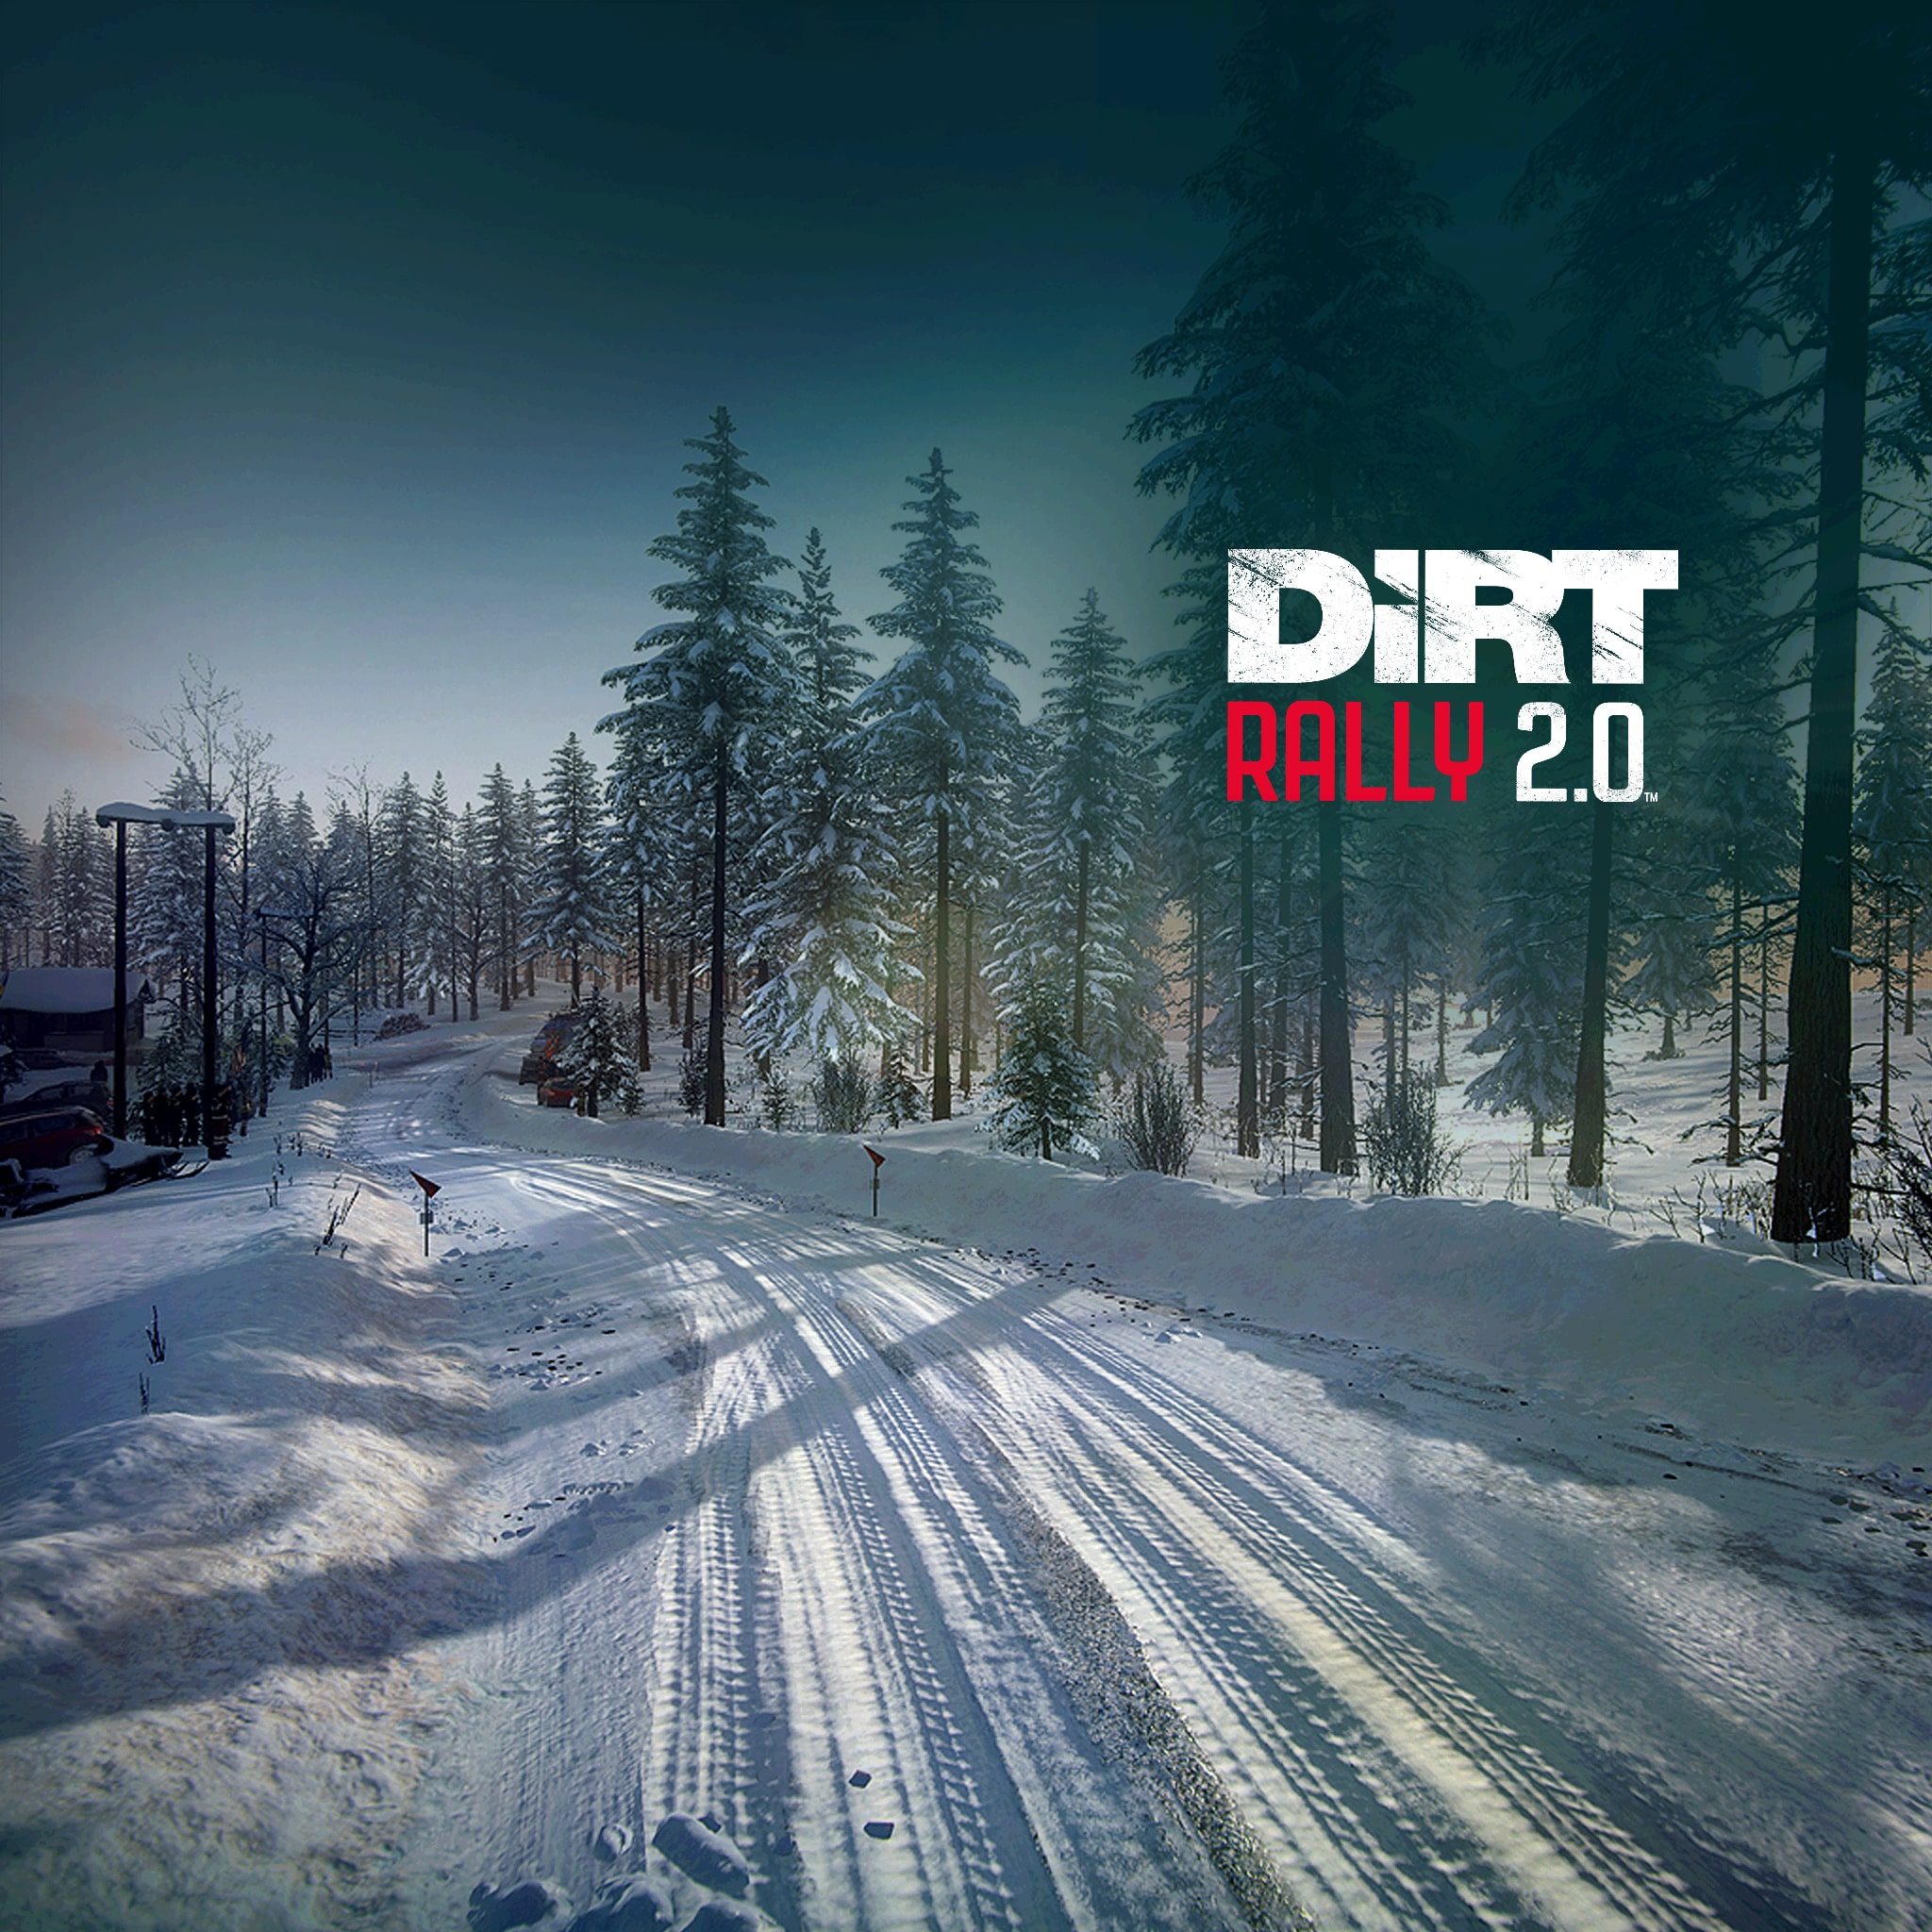 DiRT Rally 2.0 - Sweden (Rally Location)